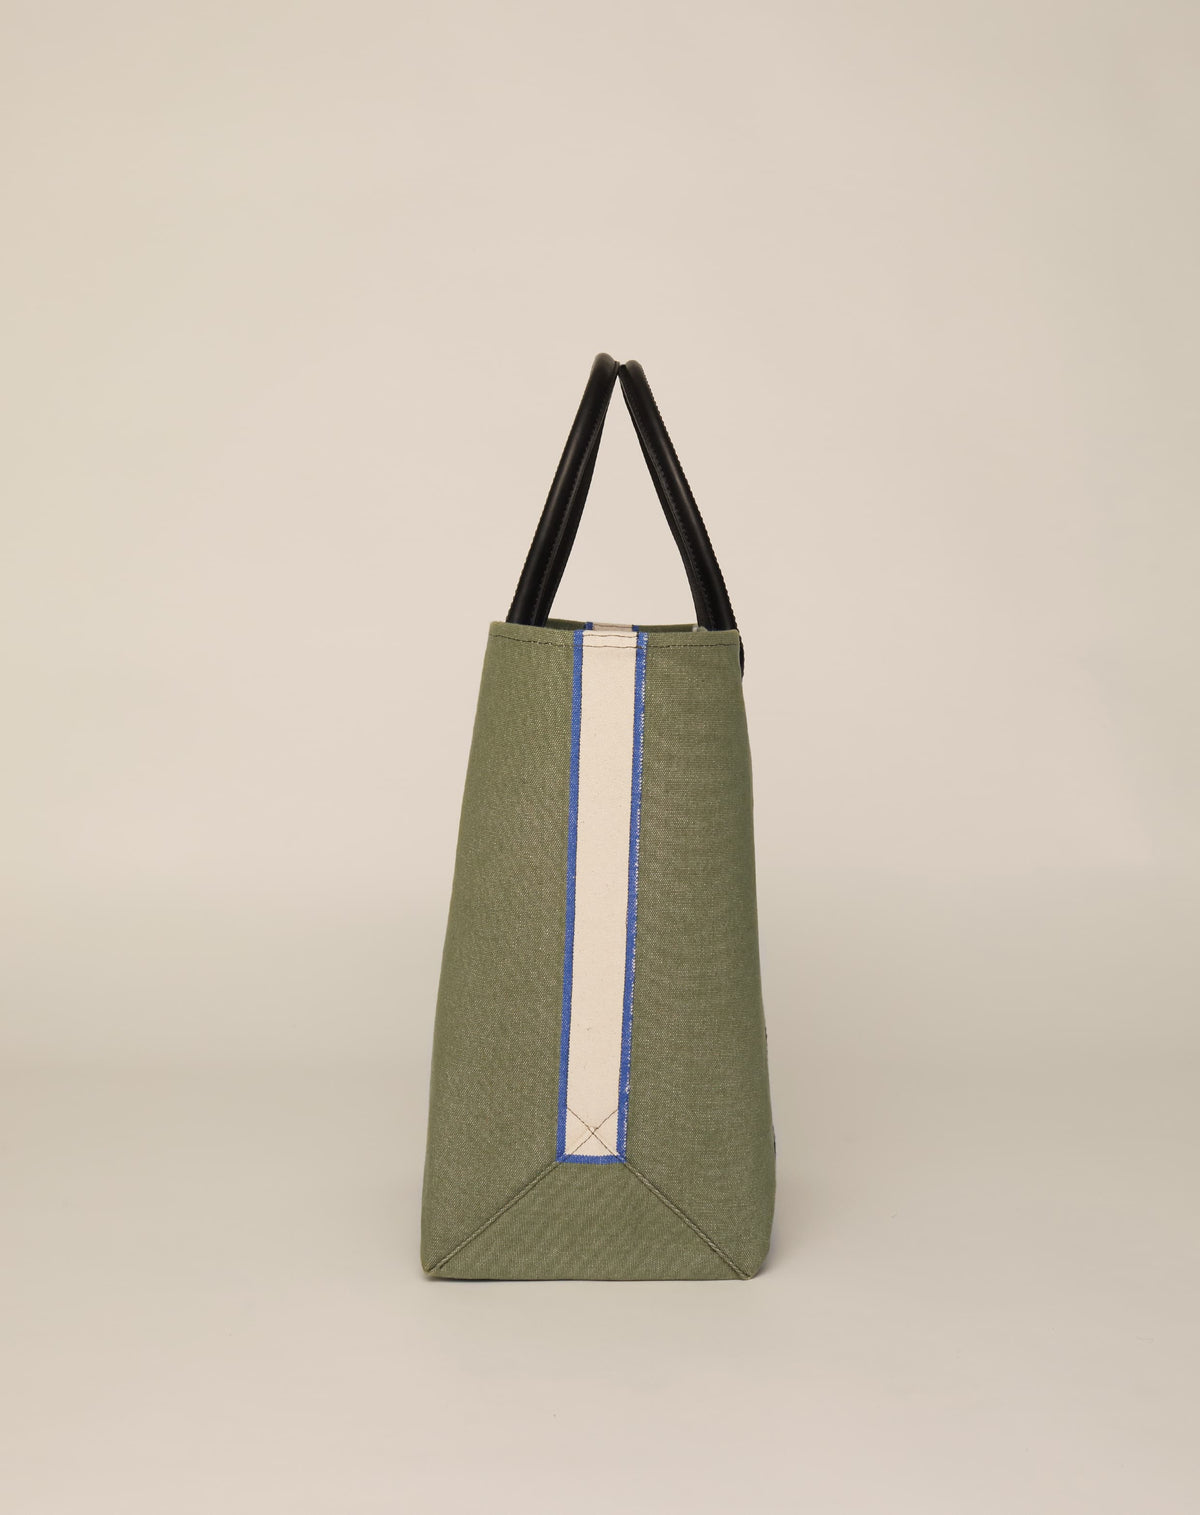 Side image of medium-sized classic canvas tote bag in sage colour with black leather handles and contrasting stripes.